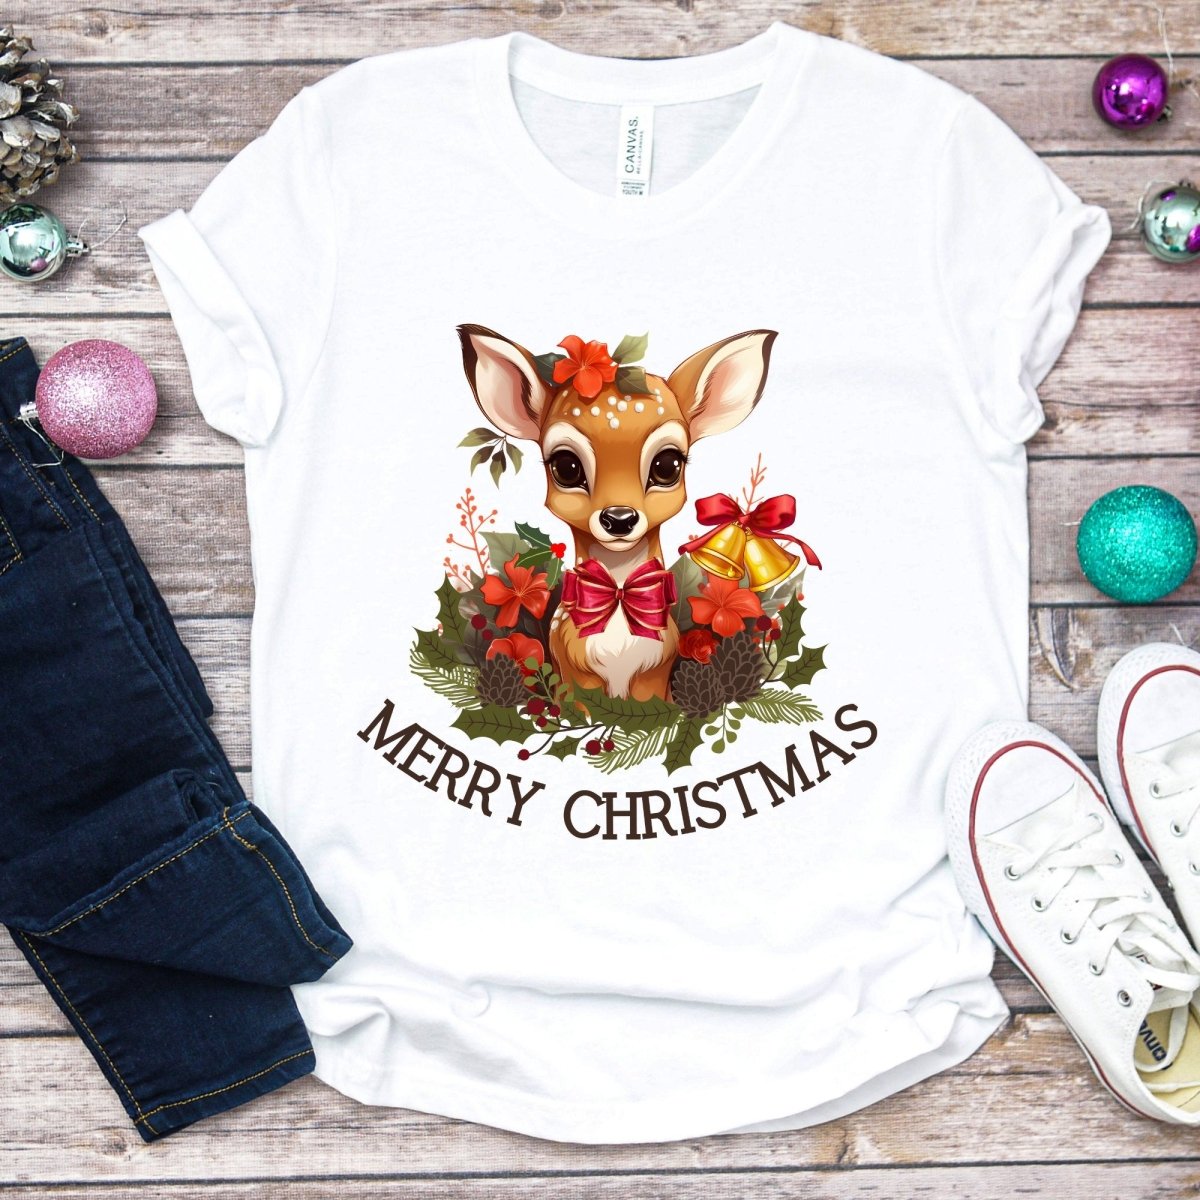 Christmas Deer T-Shirt - High Quality Festive Family Teenager T-Shirt, Gift for Deer Lovers, Cute Christmas Shirt, Youth Xmas Tee - Everything Pixel